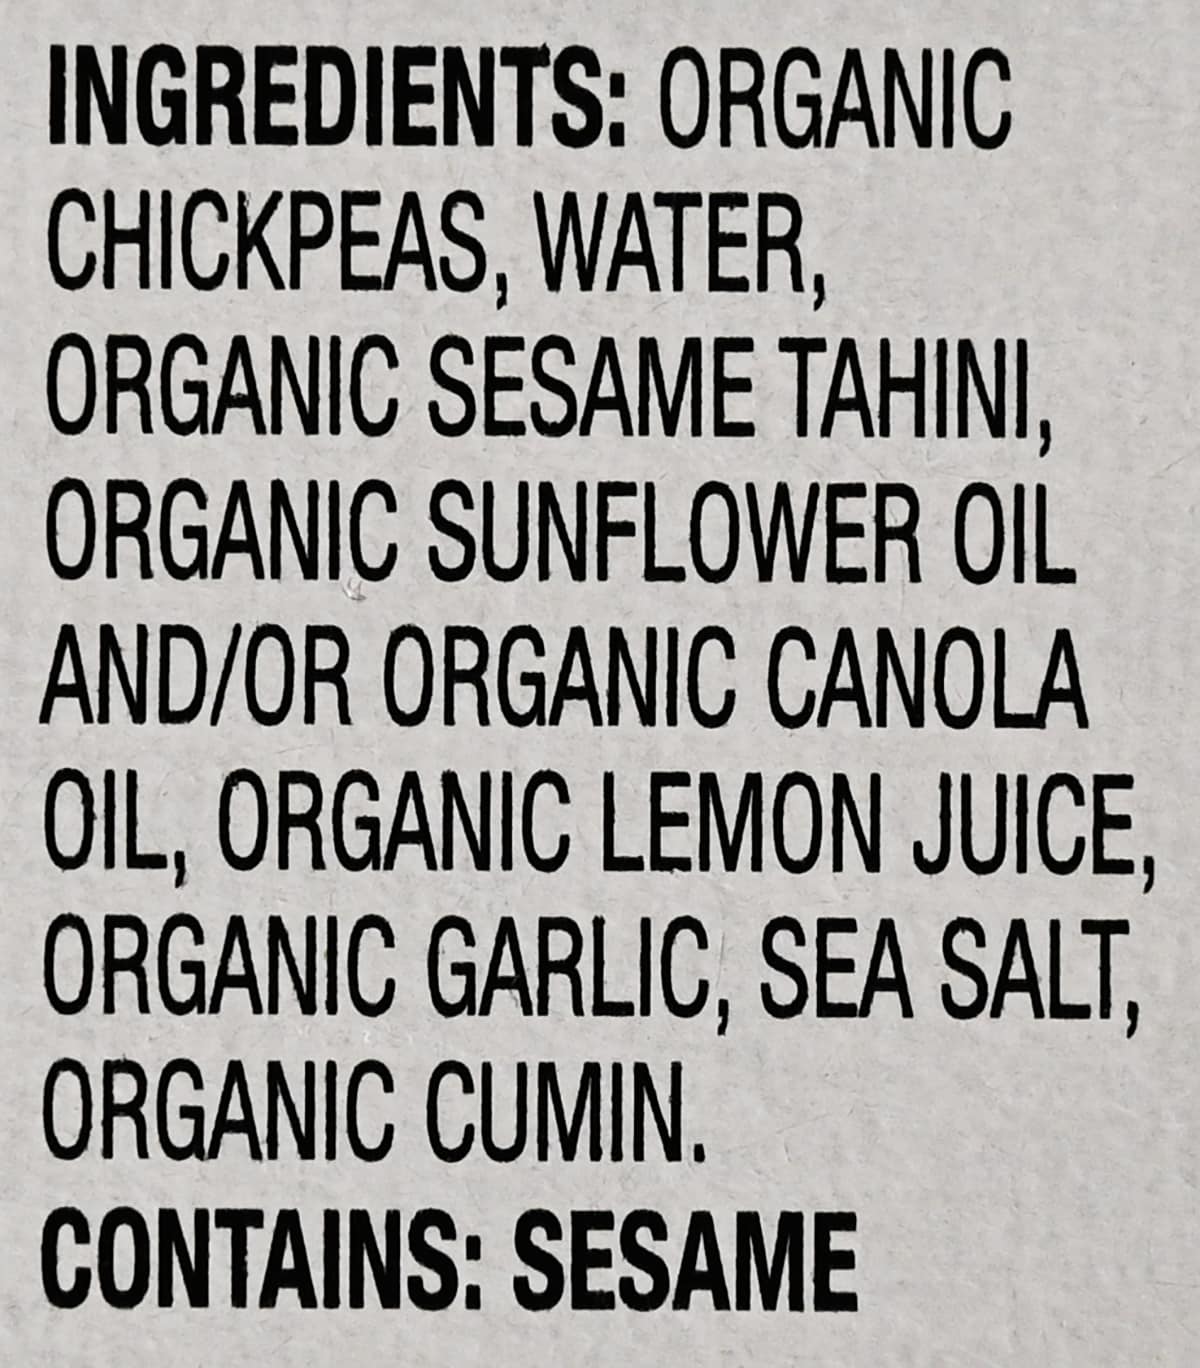 Image of the ingredients from the back of the box.